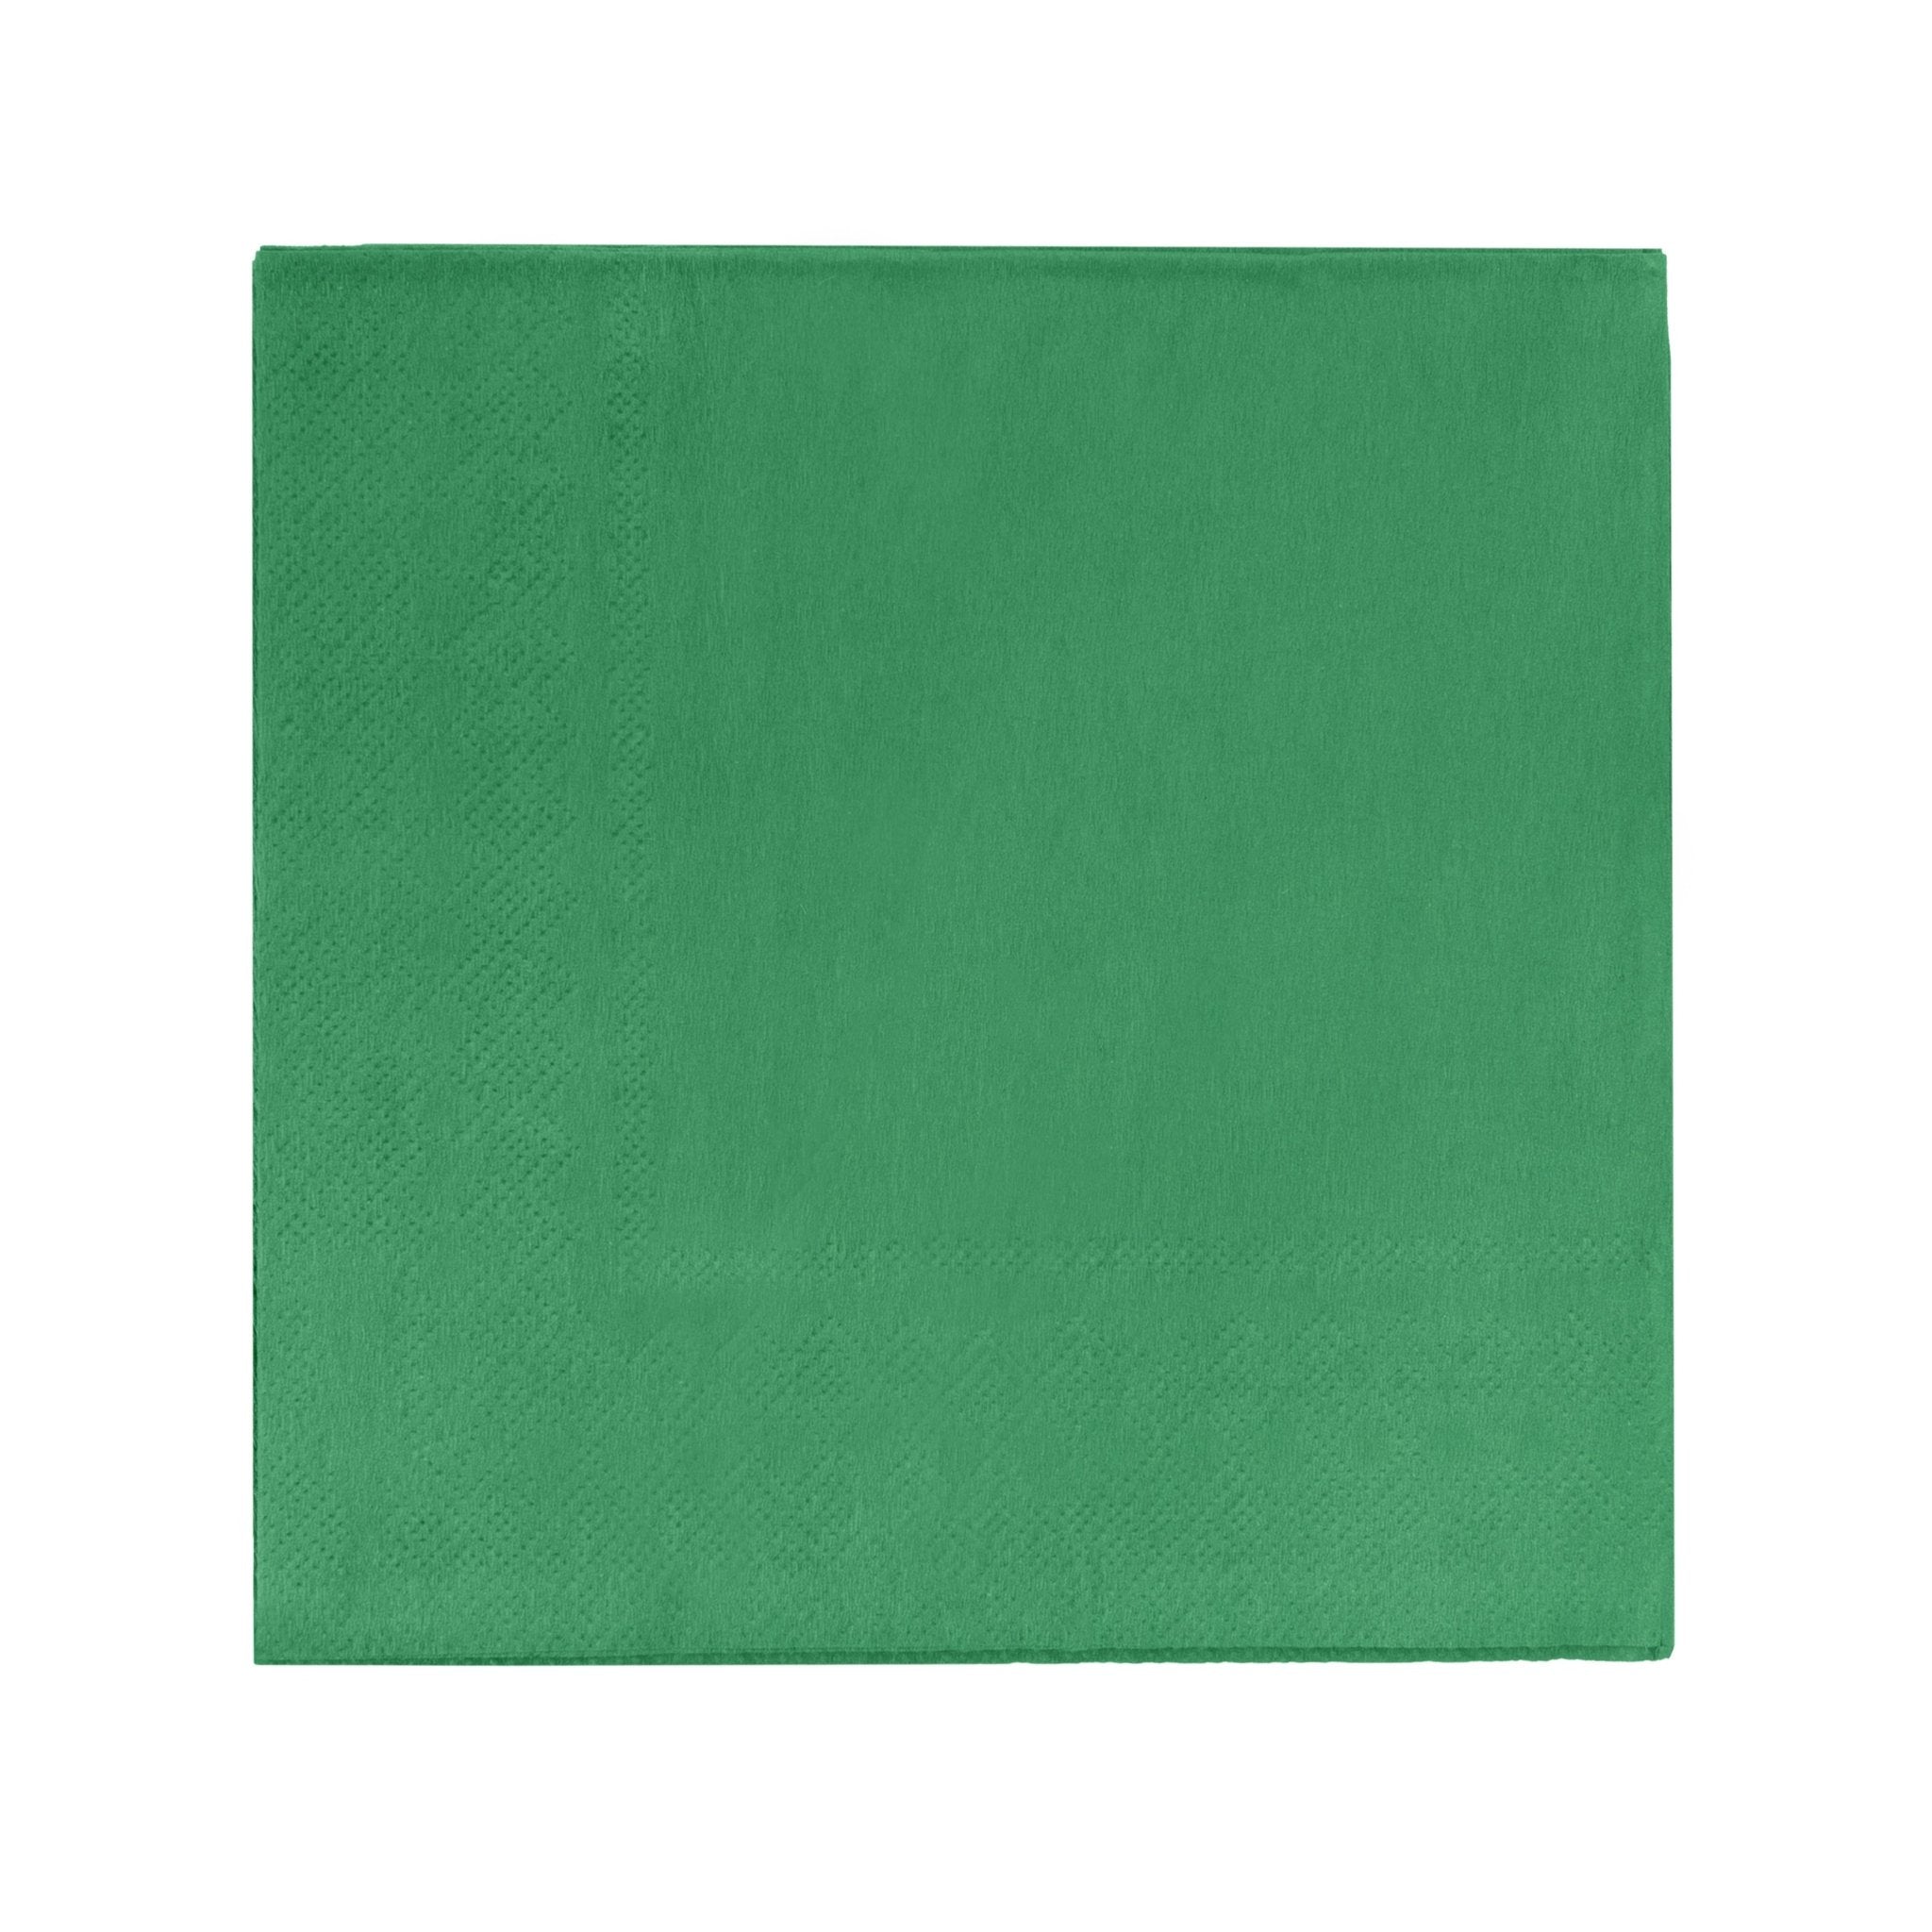 Emerald Green Luncheon Napkins | 3600 Pack